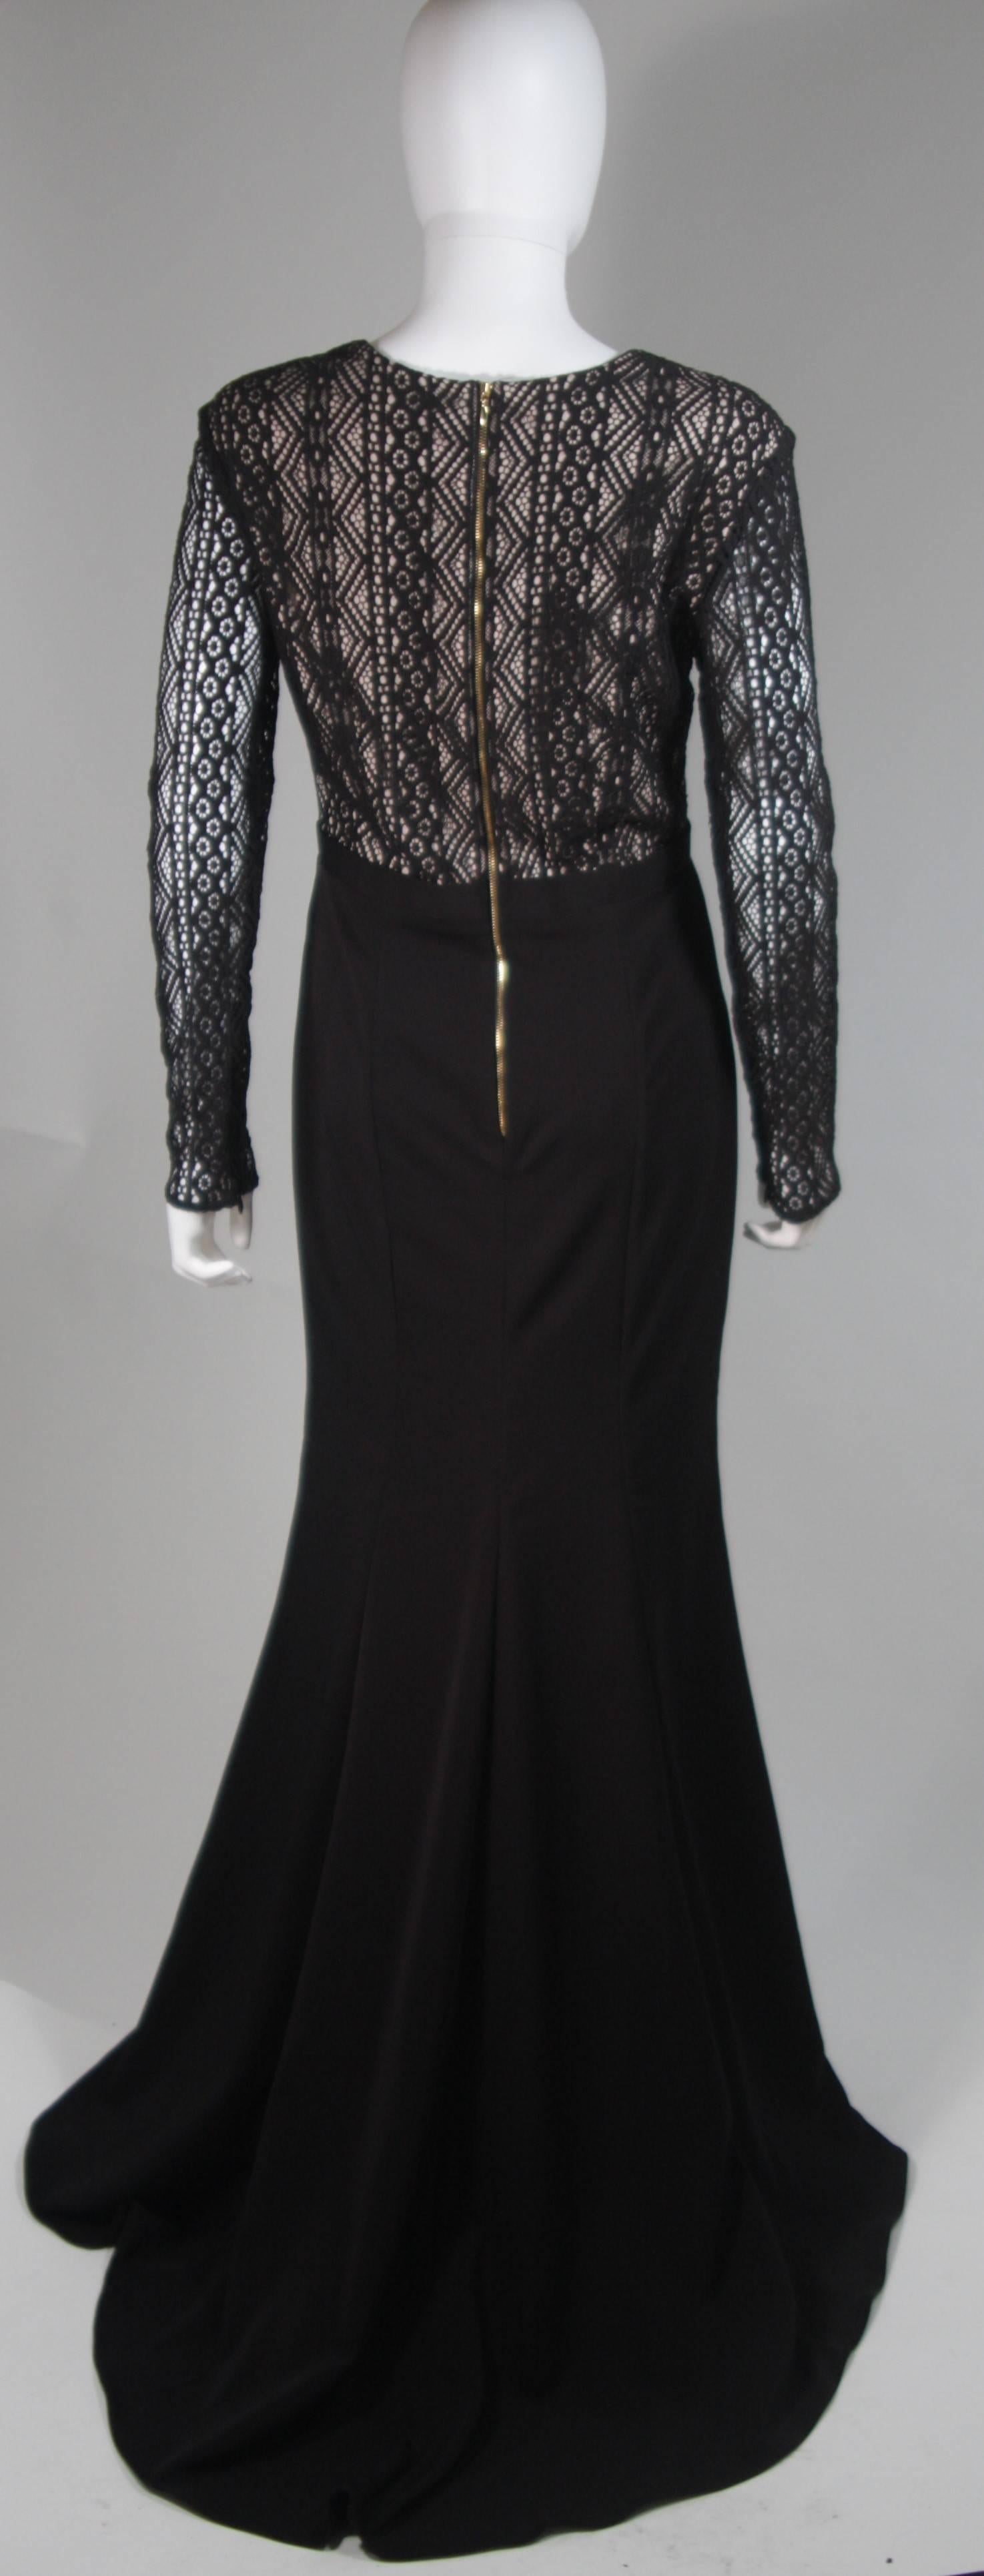 NAEEM KANH Black Jersey with Lace Evening Gown Size 8 For Sale 5